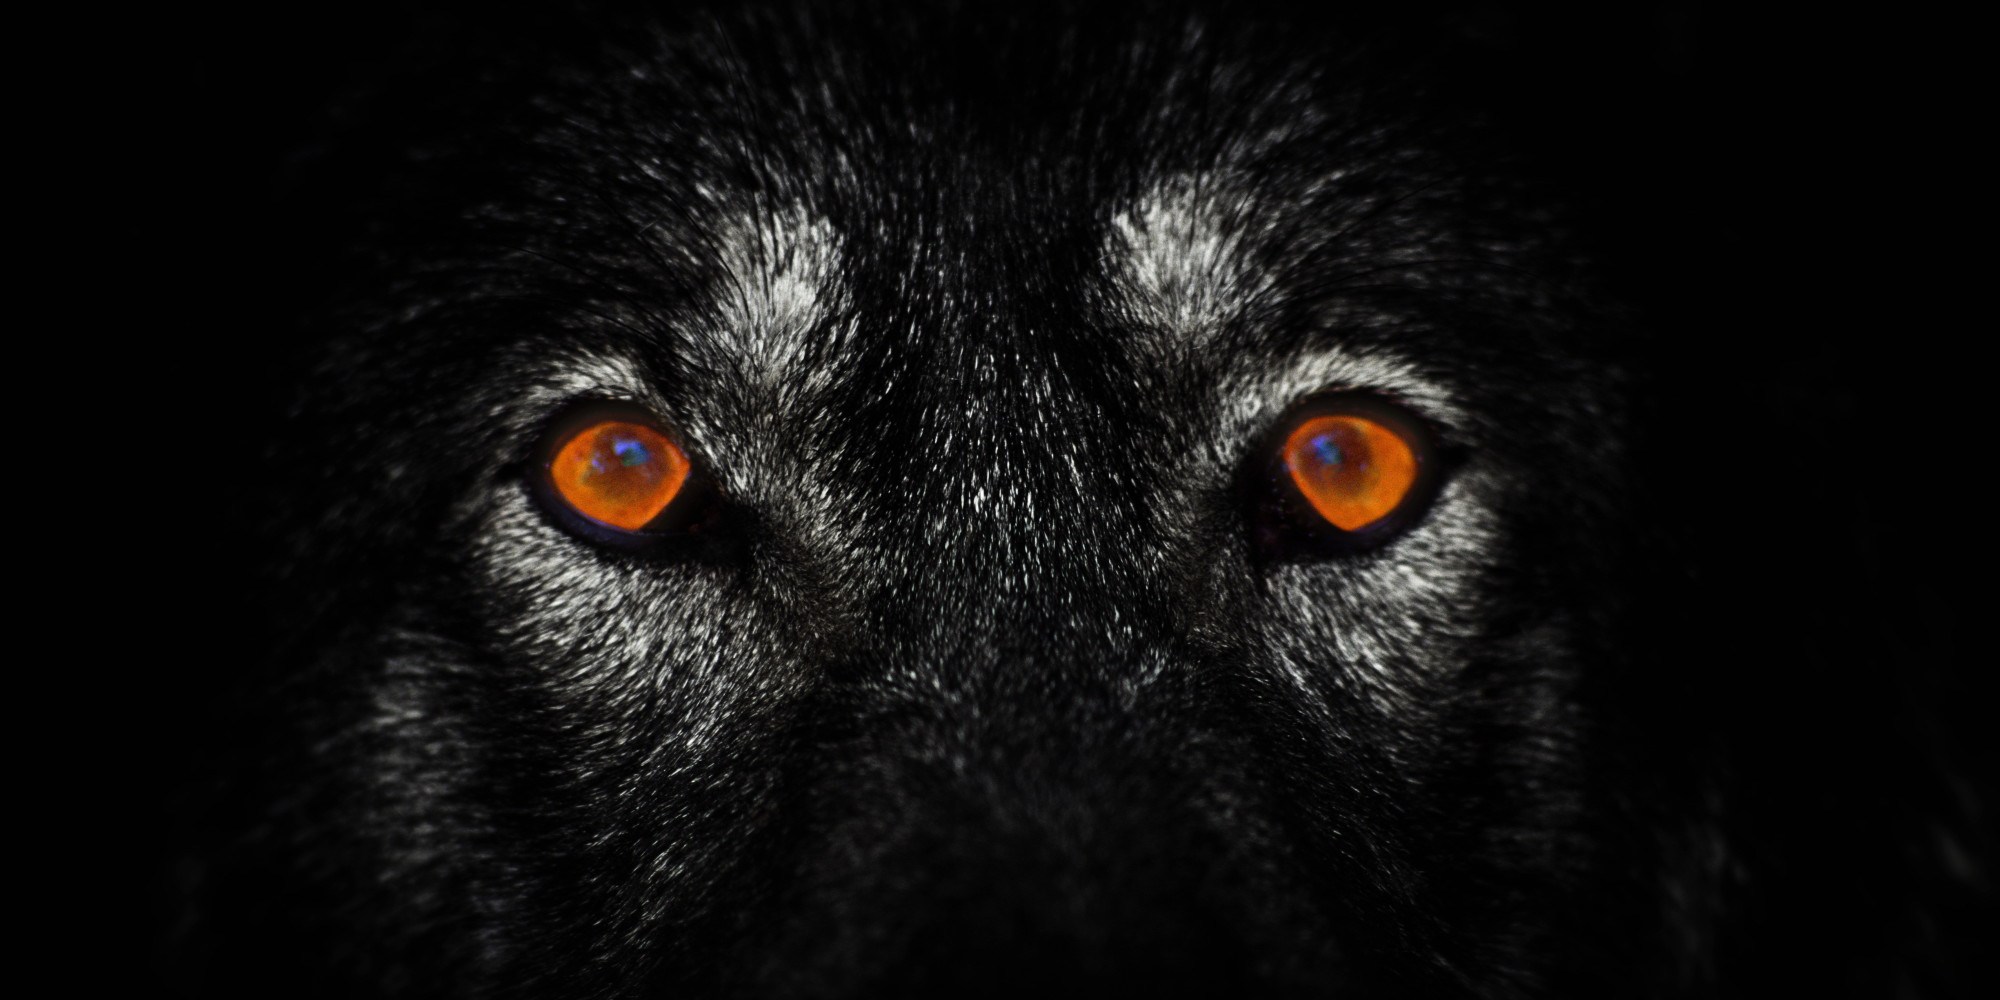 Are You a Lone Wolf?